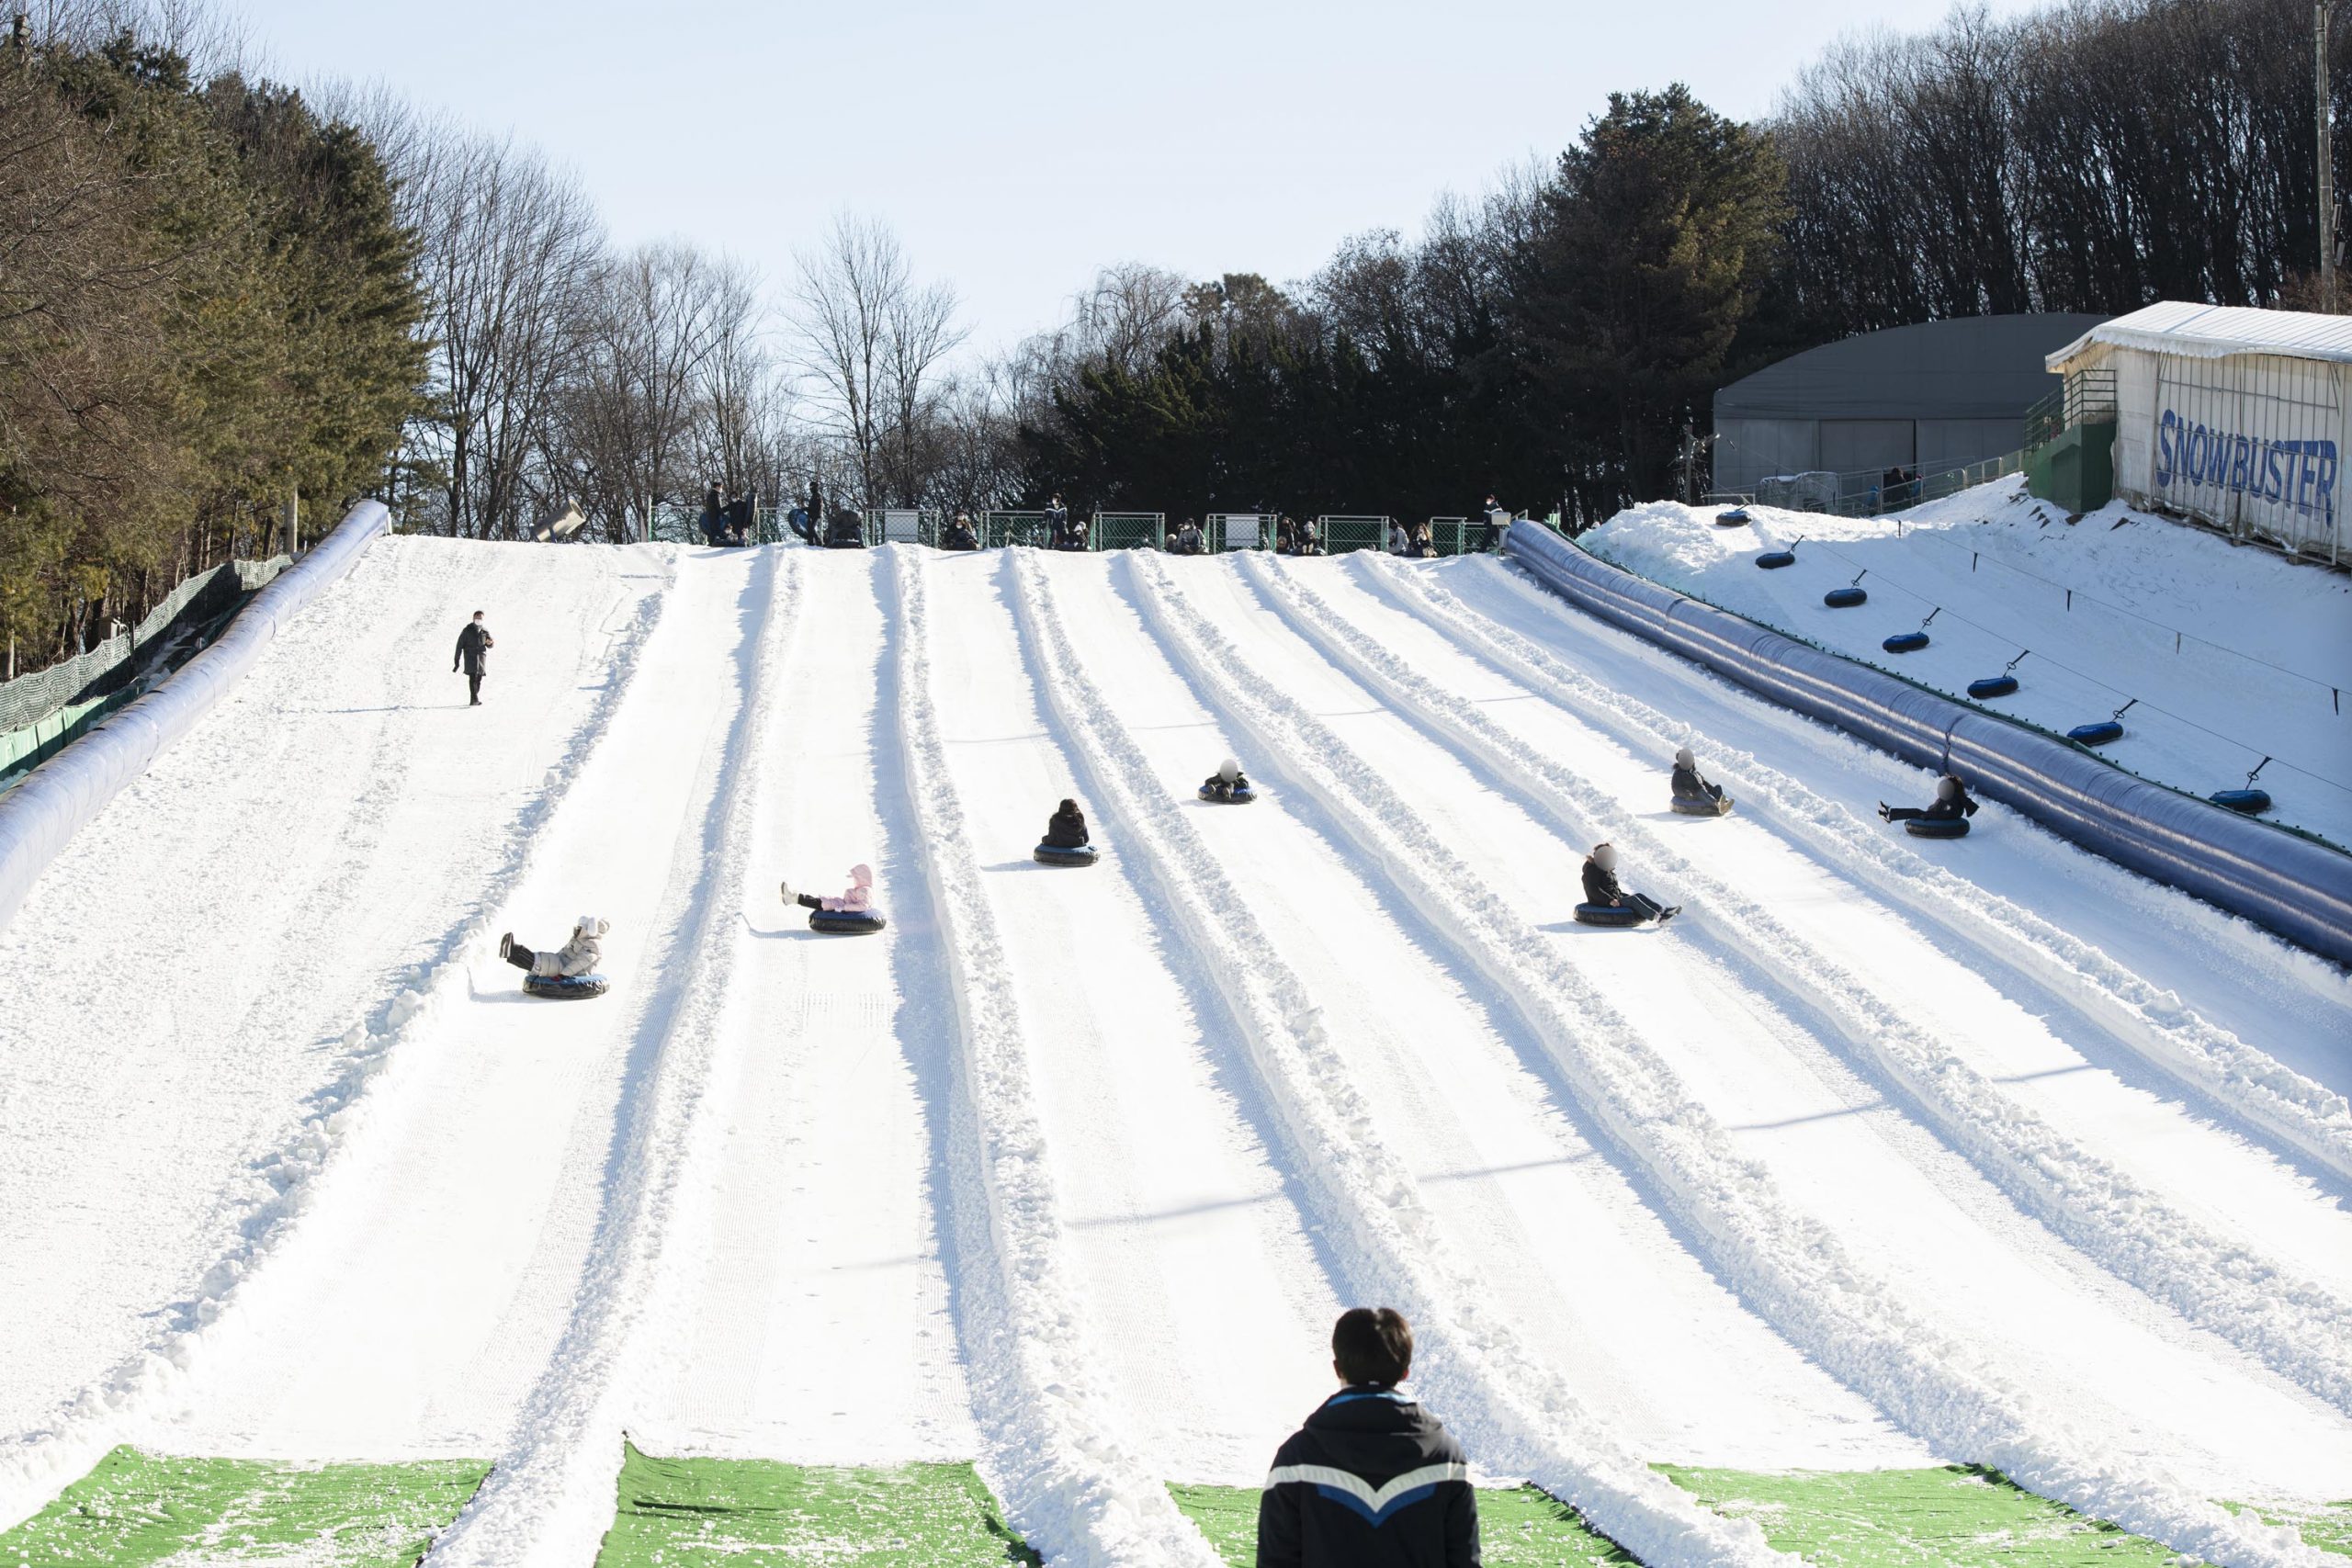 Each course at the Snow Buster has multiple lanes.